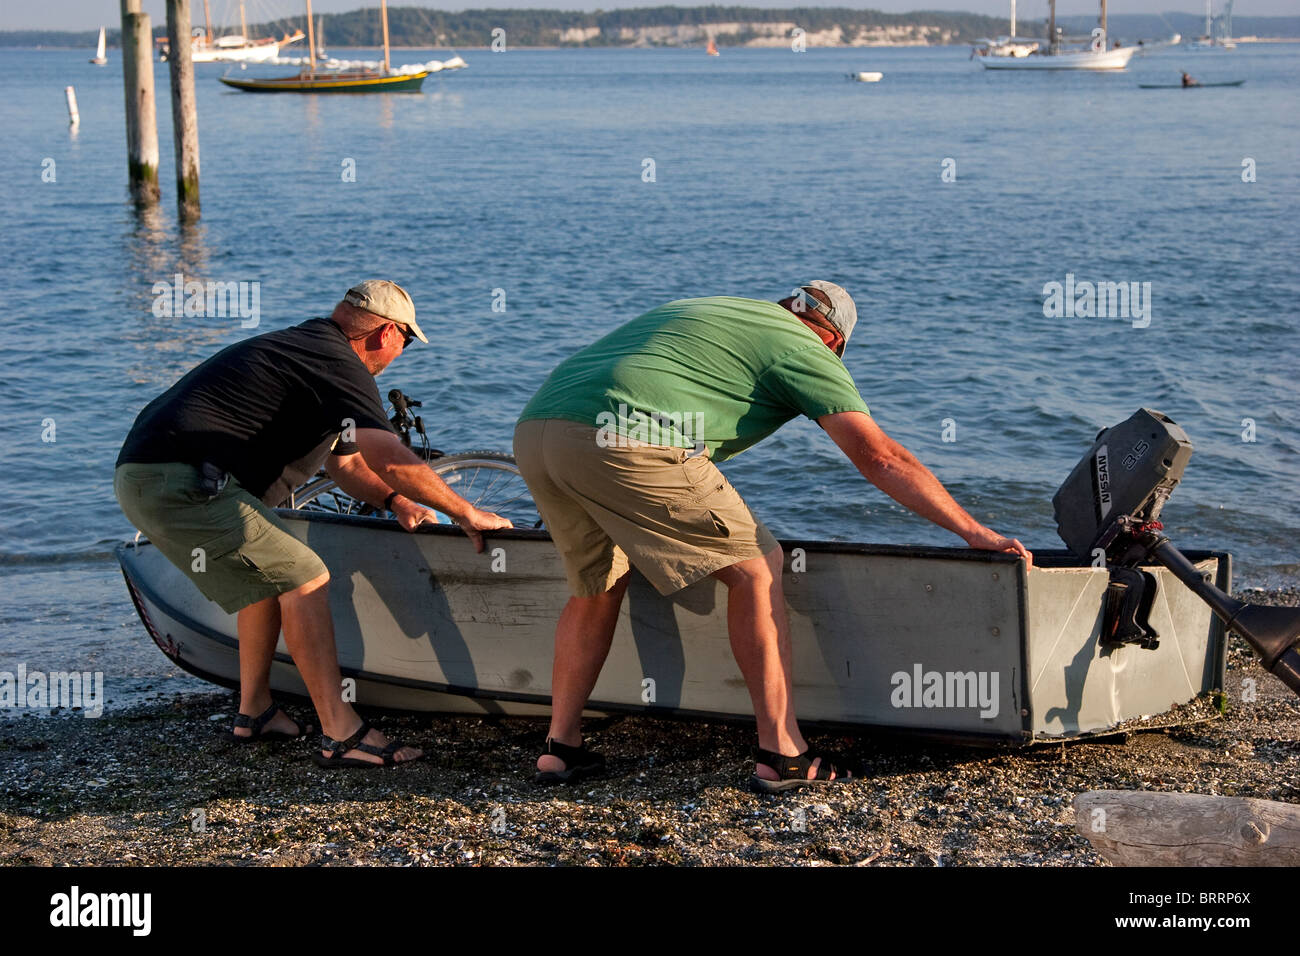 Two men heave and pull a small wooden dingy boat from the beach into the water, Port Townsend, Washington, USA Stock Photo